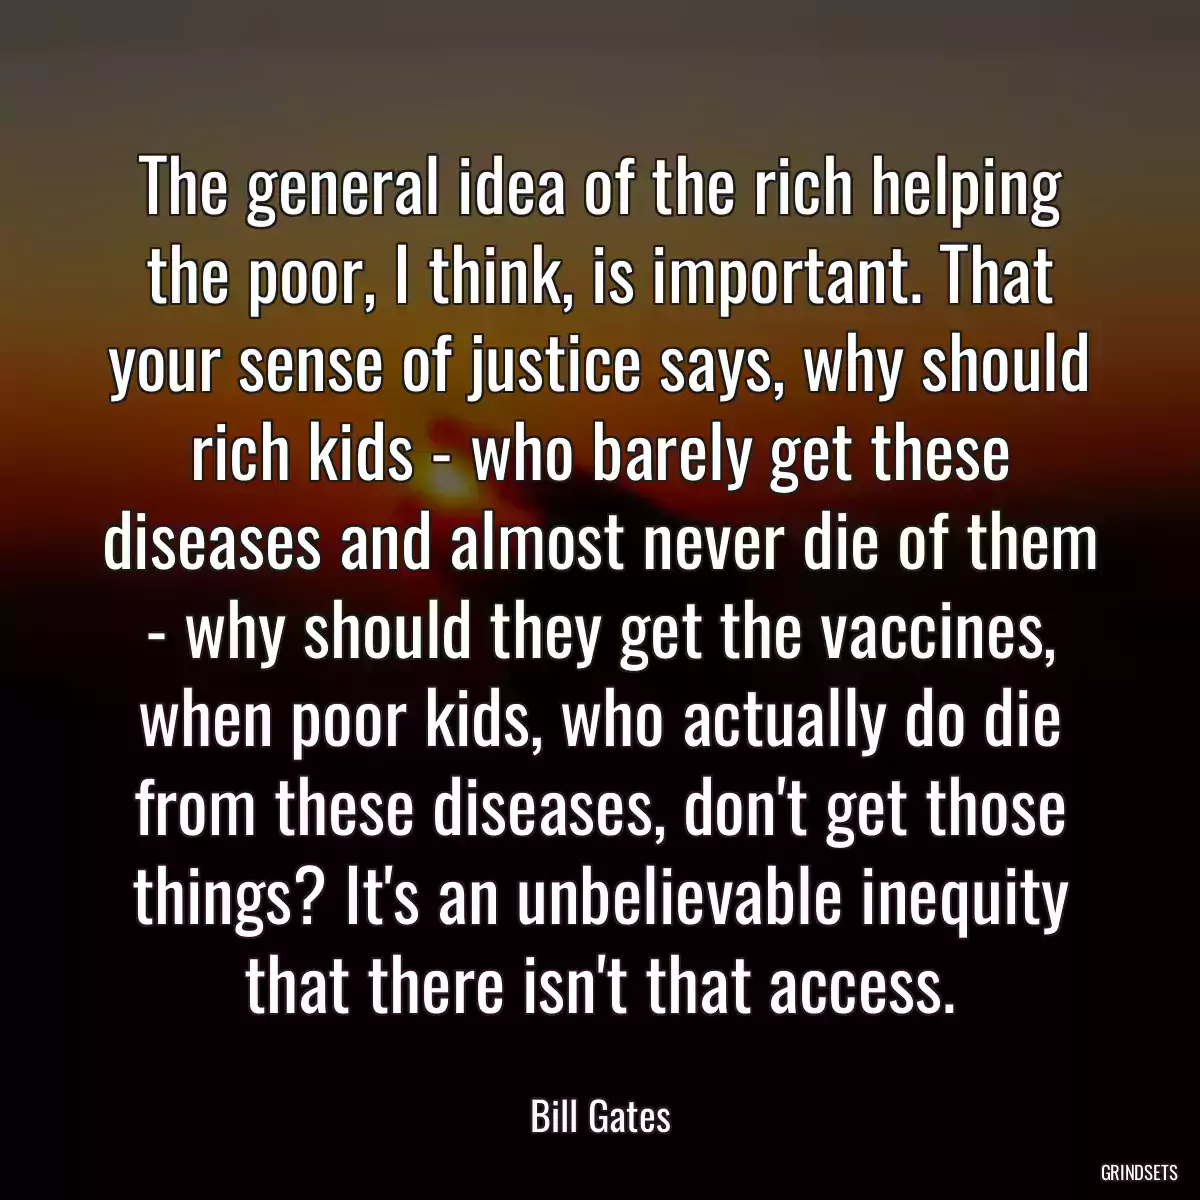 The general idea of the rich helping the poor, I think, is important. That your sense of justice says, why should rich kids - who barely get these diseases and almost never die of them - why should they get the vaccines, when poor kids, who actually do die from these diseases, don\'t get those things? It\'s an unbelievable inequity that there isn\'t that access.